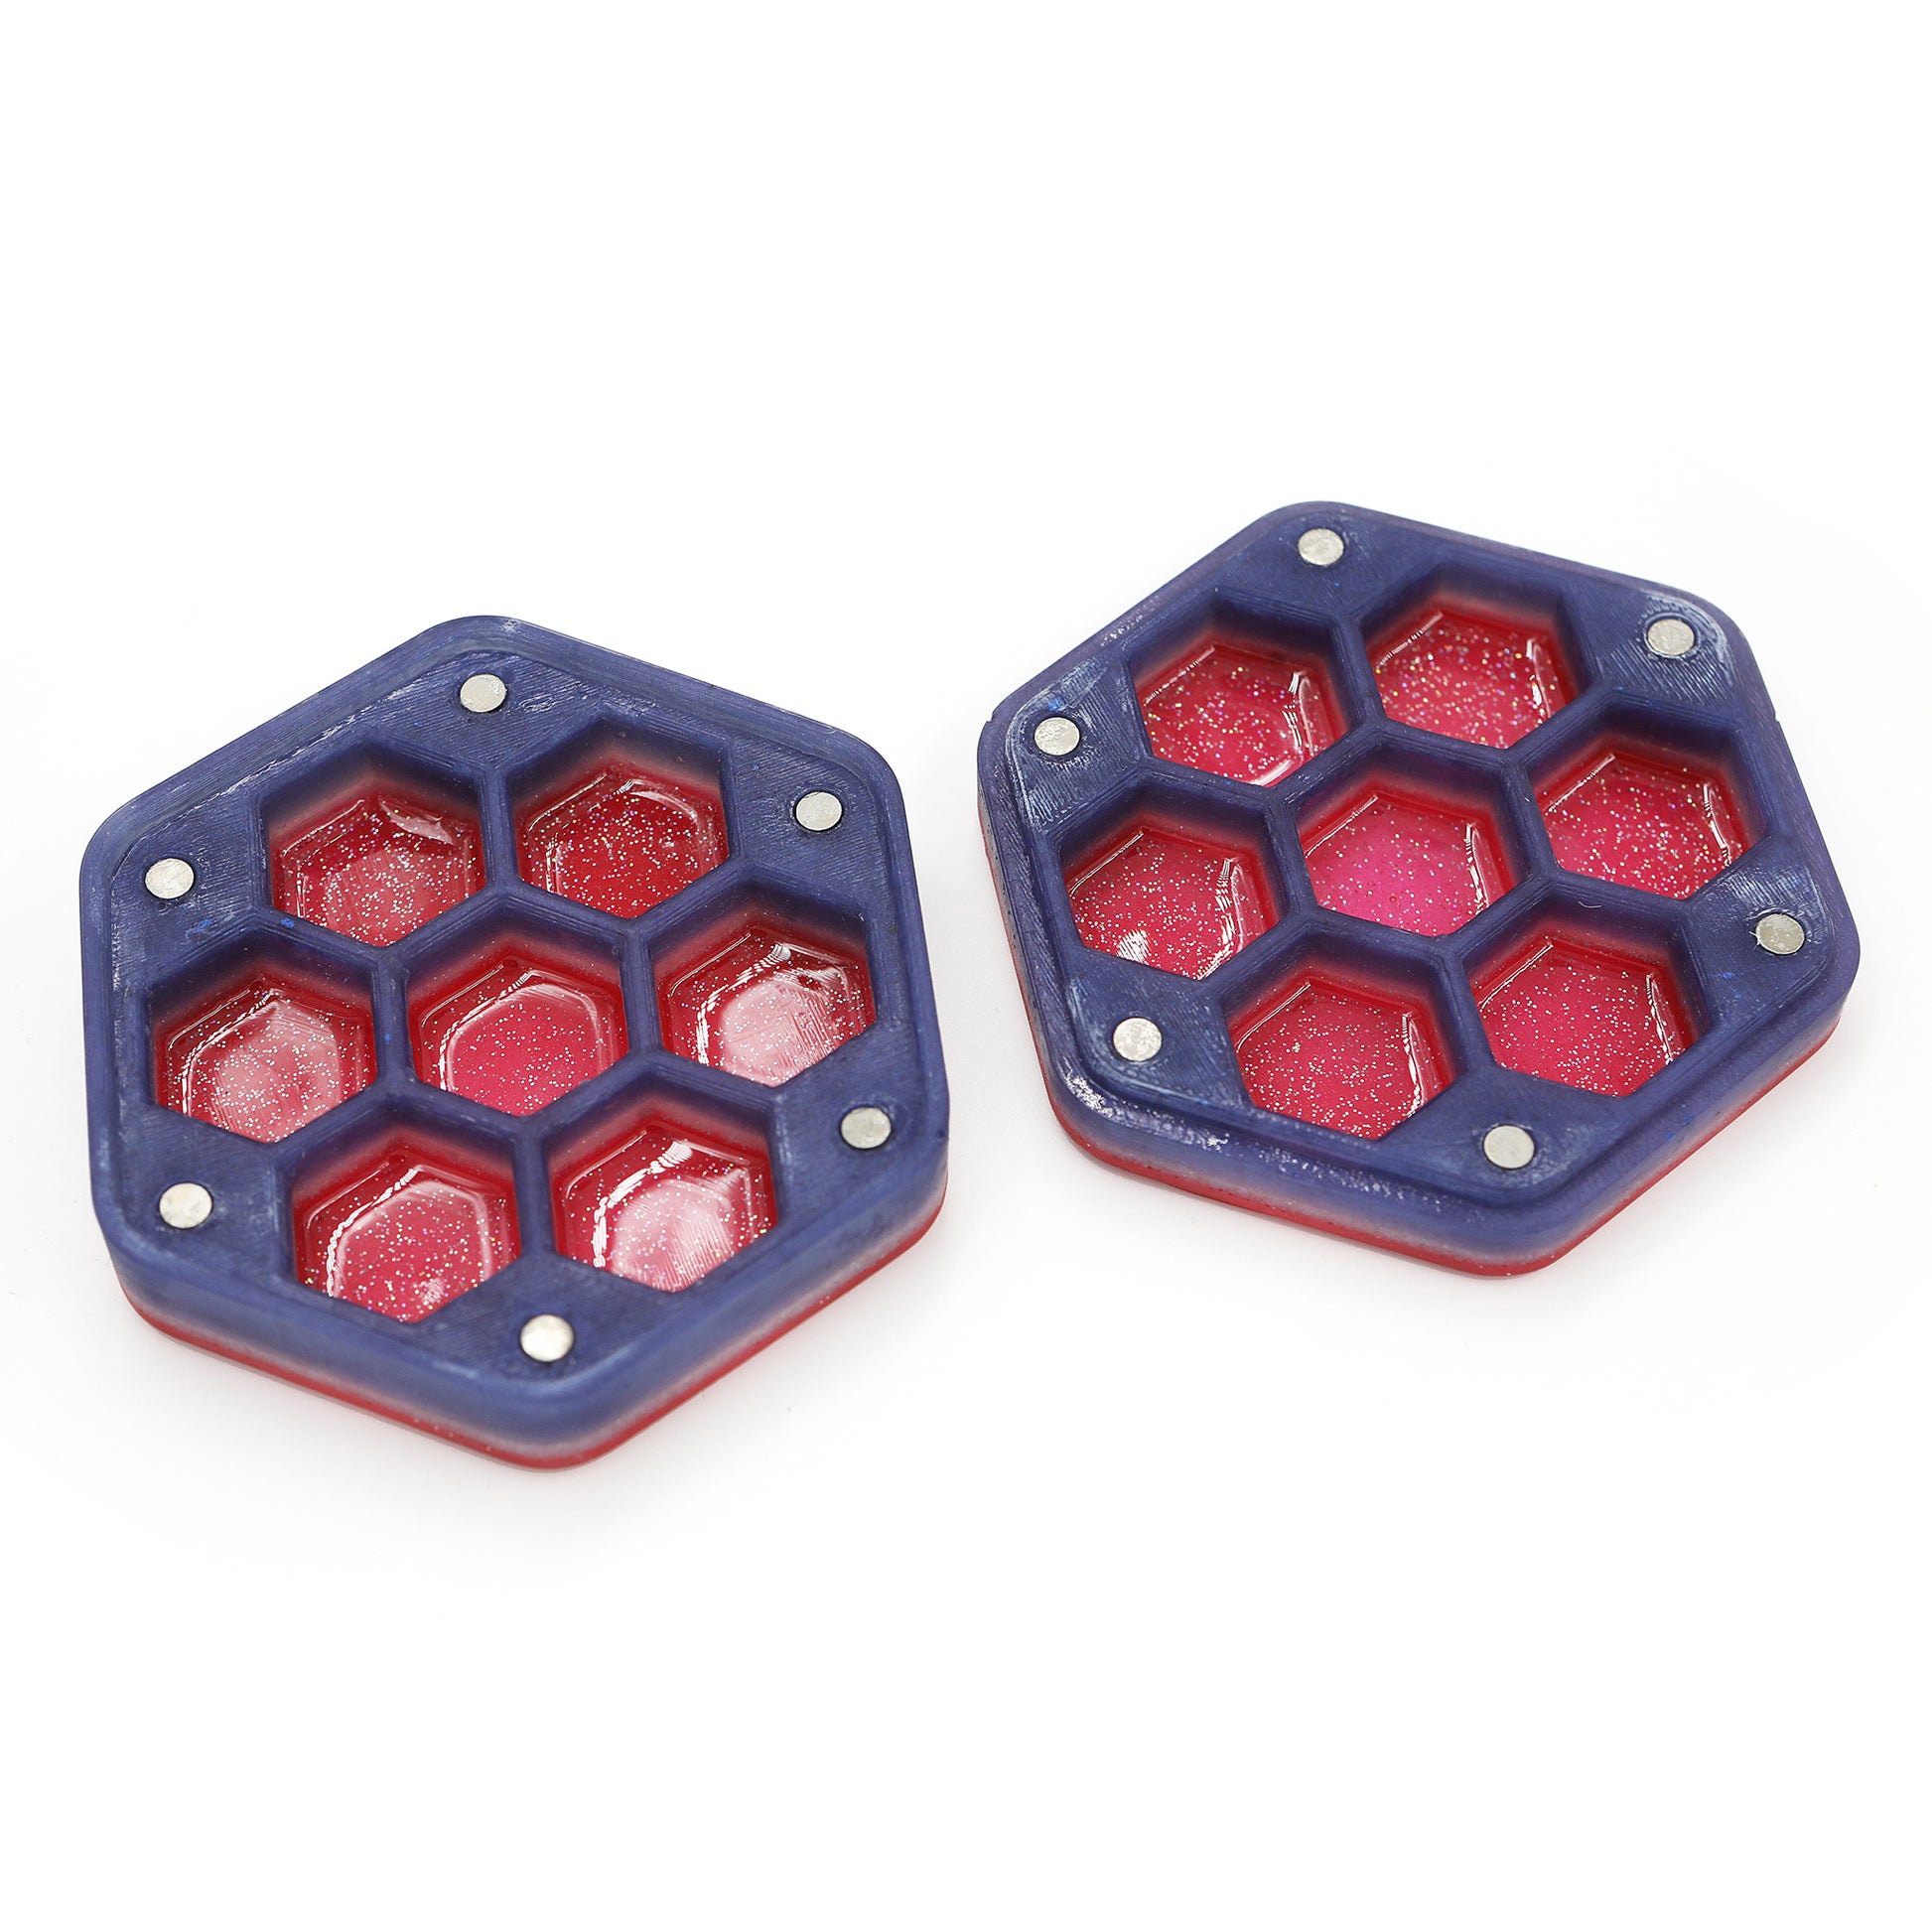 Inside view of hexagonal acrylic dice box. The purple honeycomb shape reveals glittery red pockets to hold dice.